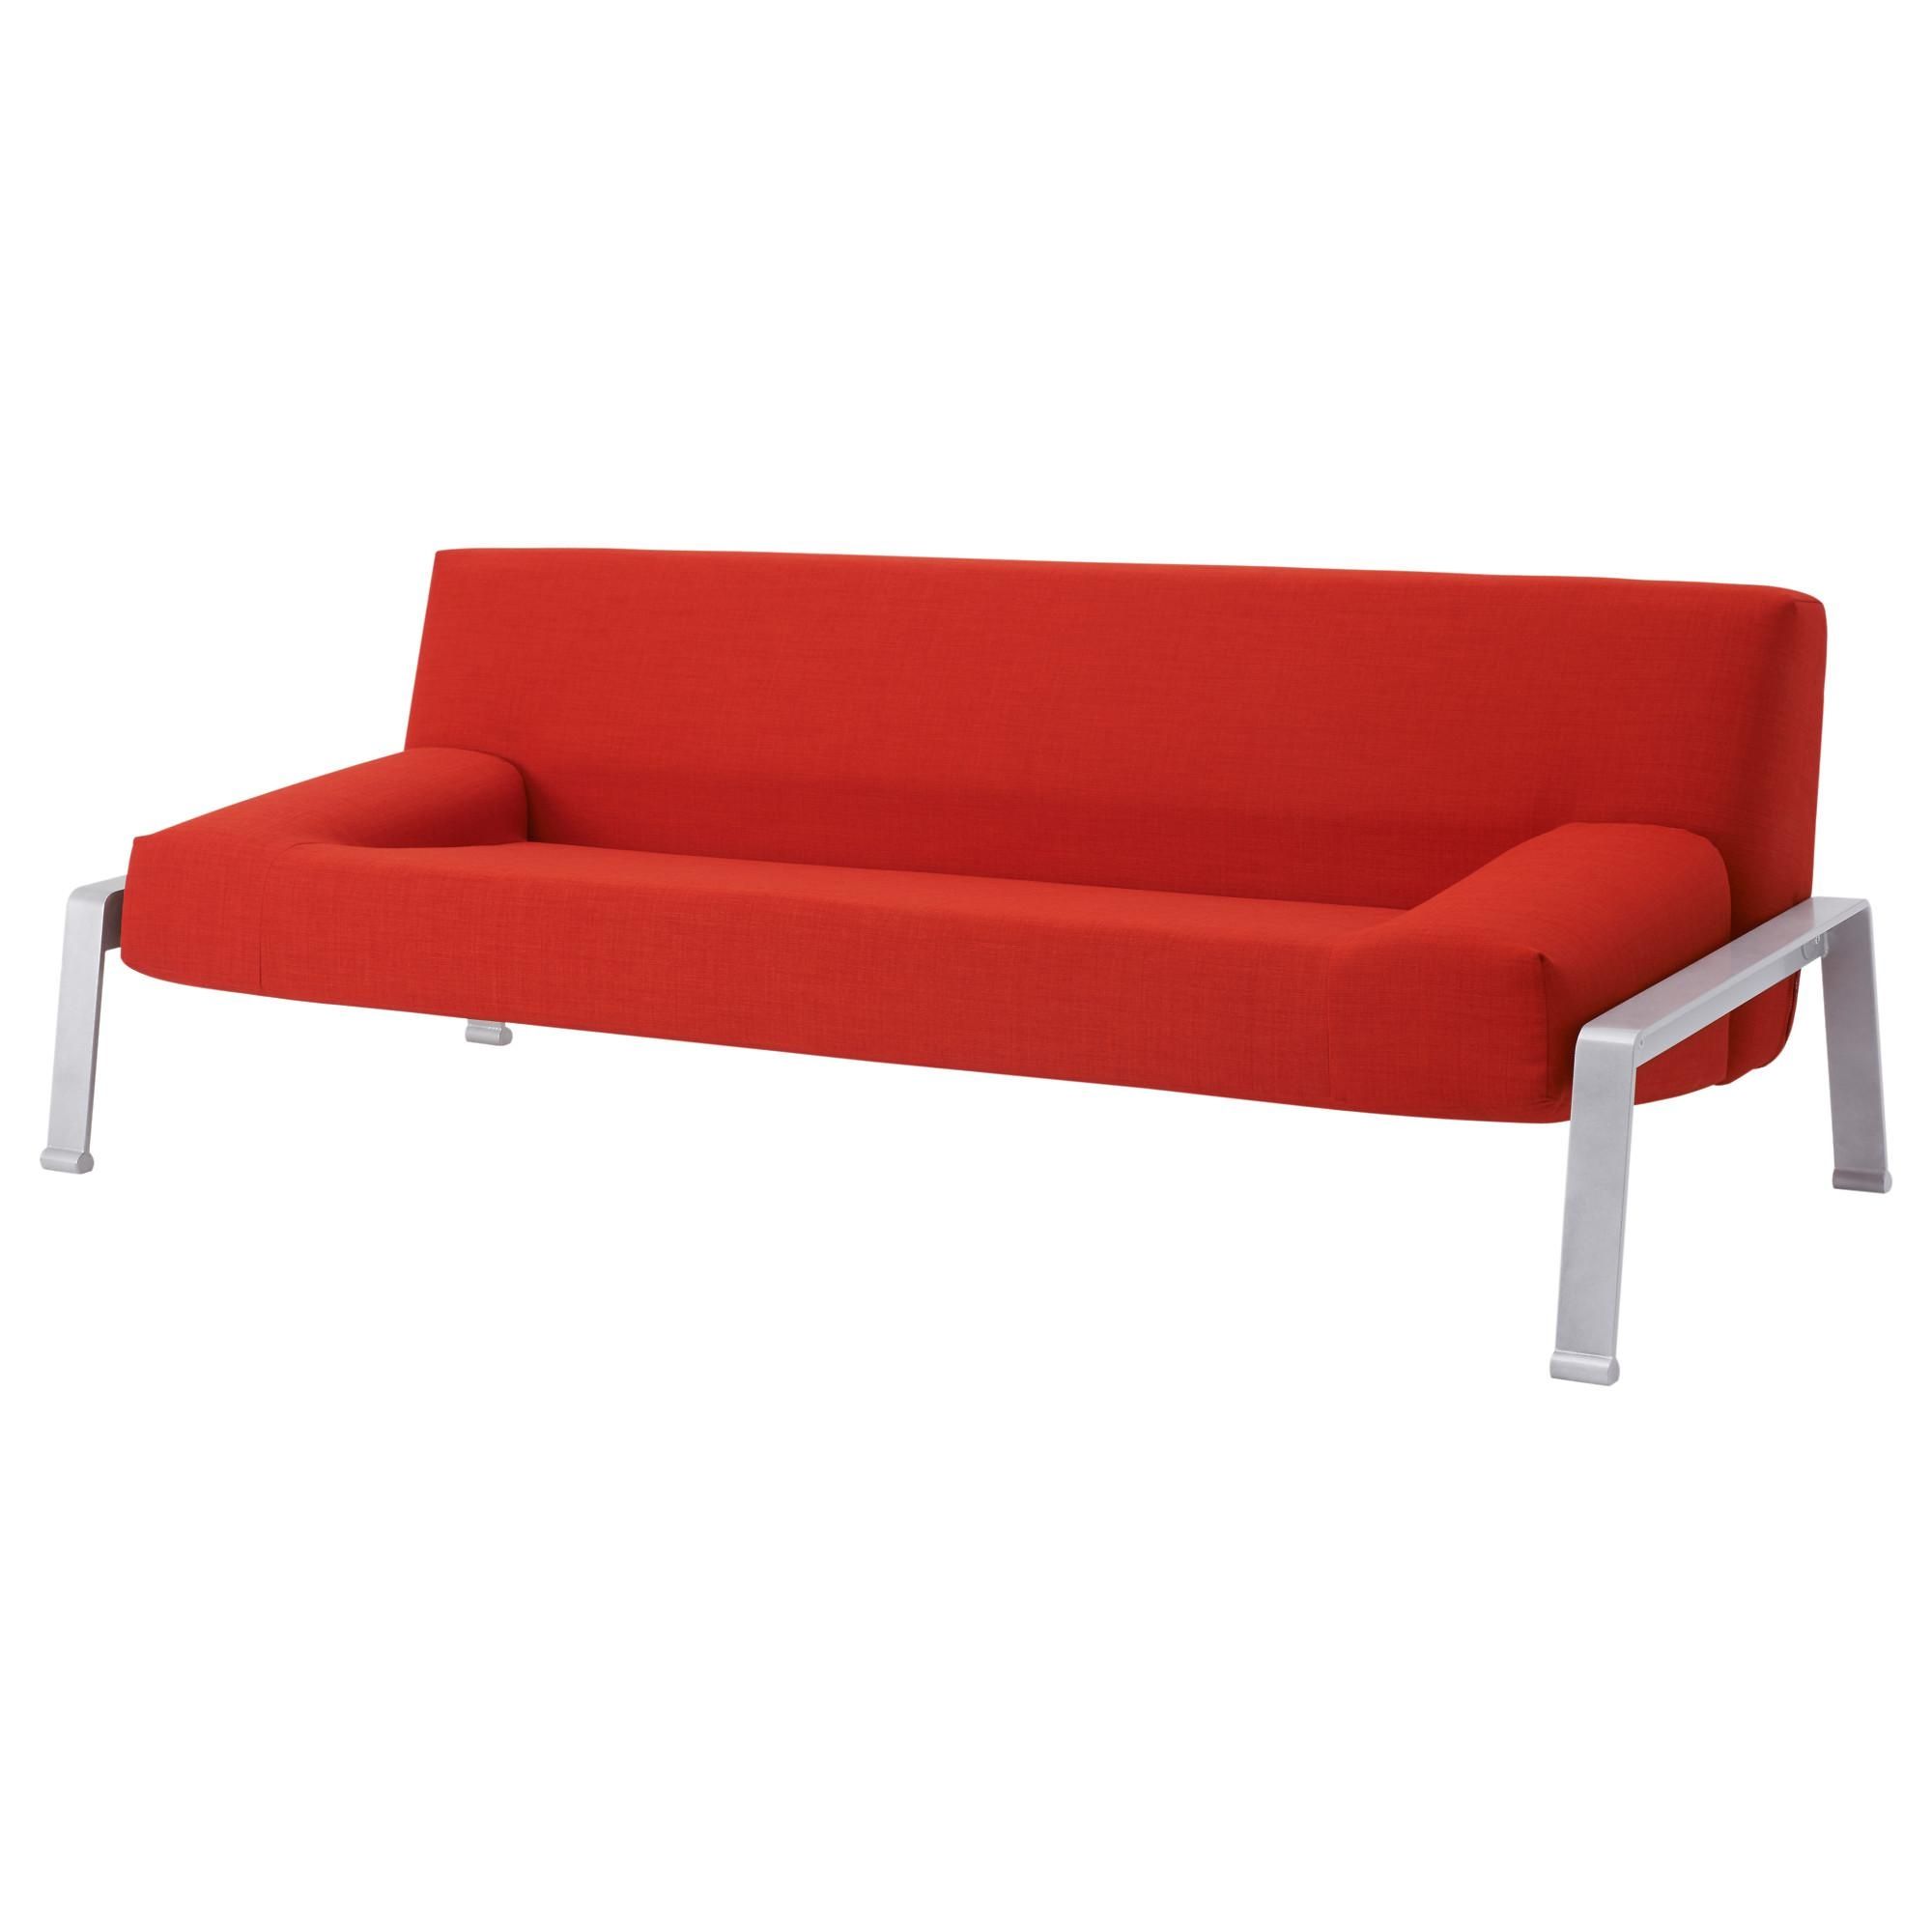 Furniture: Ikea Sofa Beds | Sofa With Pull Out Bed Ikea | Ikea Regarding Cheap Single Sofa Bed Chairs (View 11 of 20)